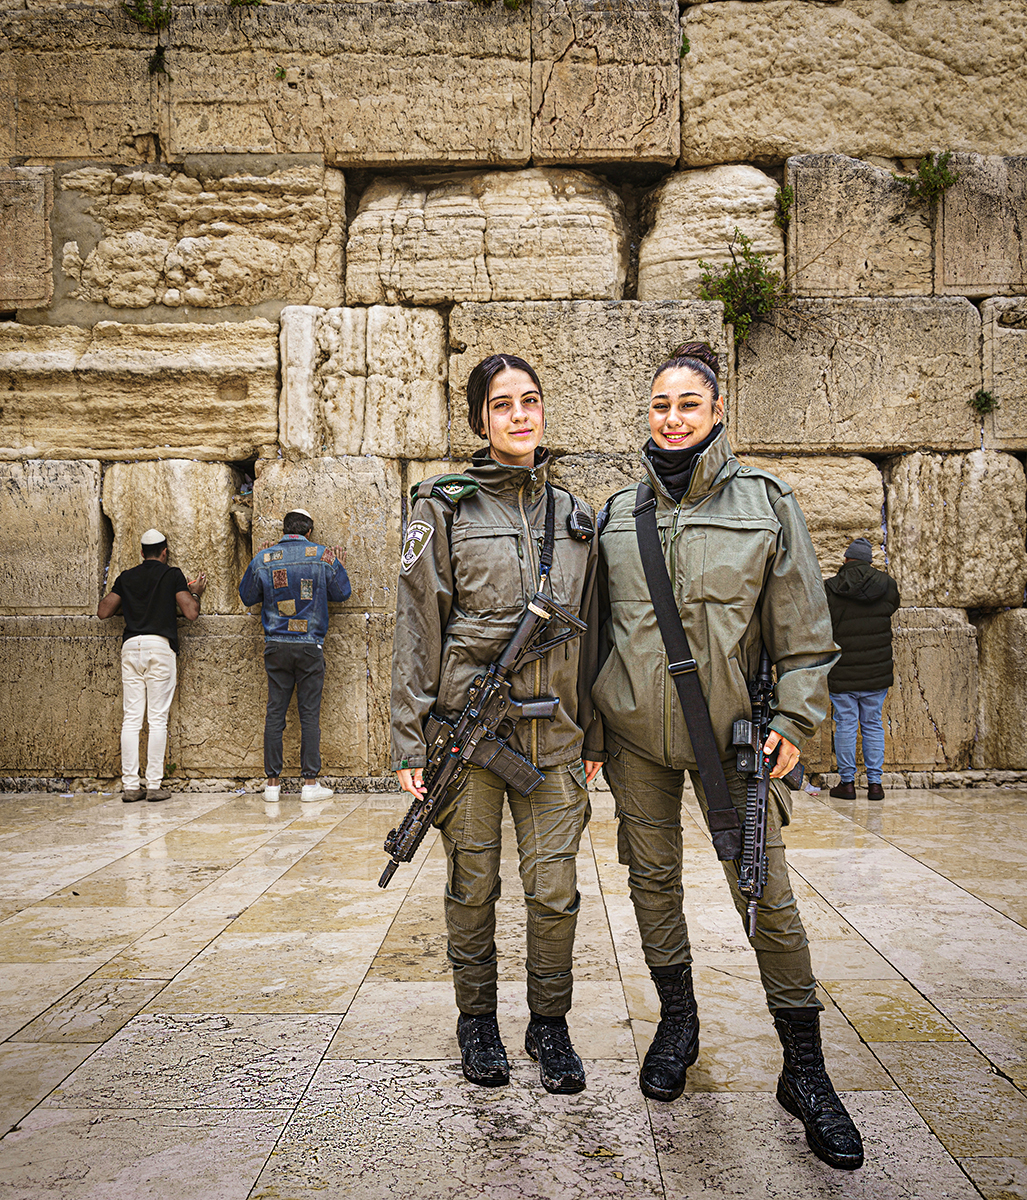 YOUNG SOLDIERS IN JERUSALEM by Malcolm Nabarro